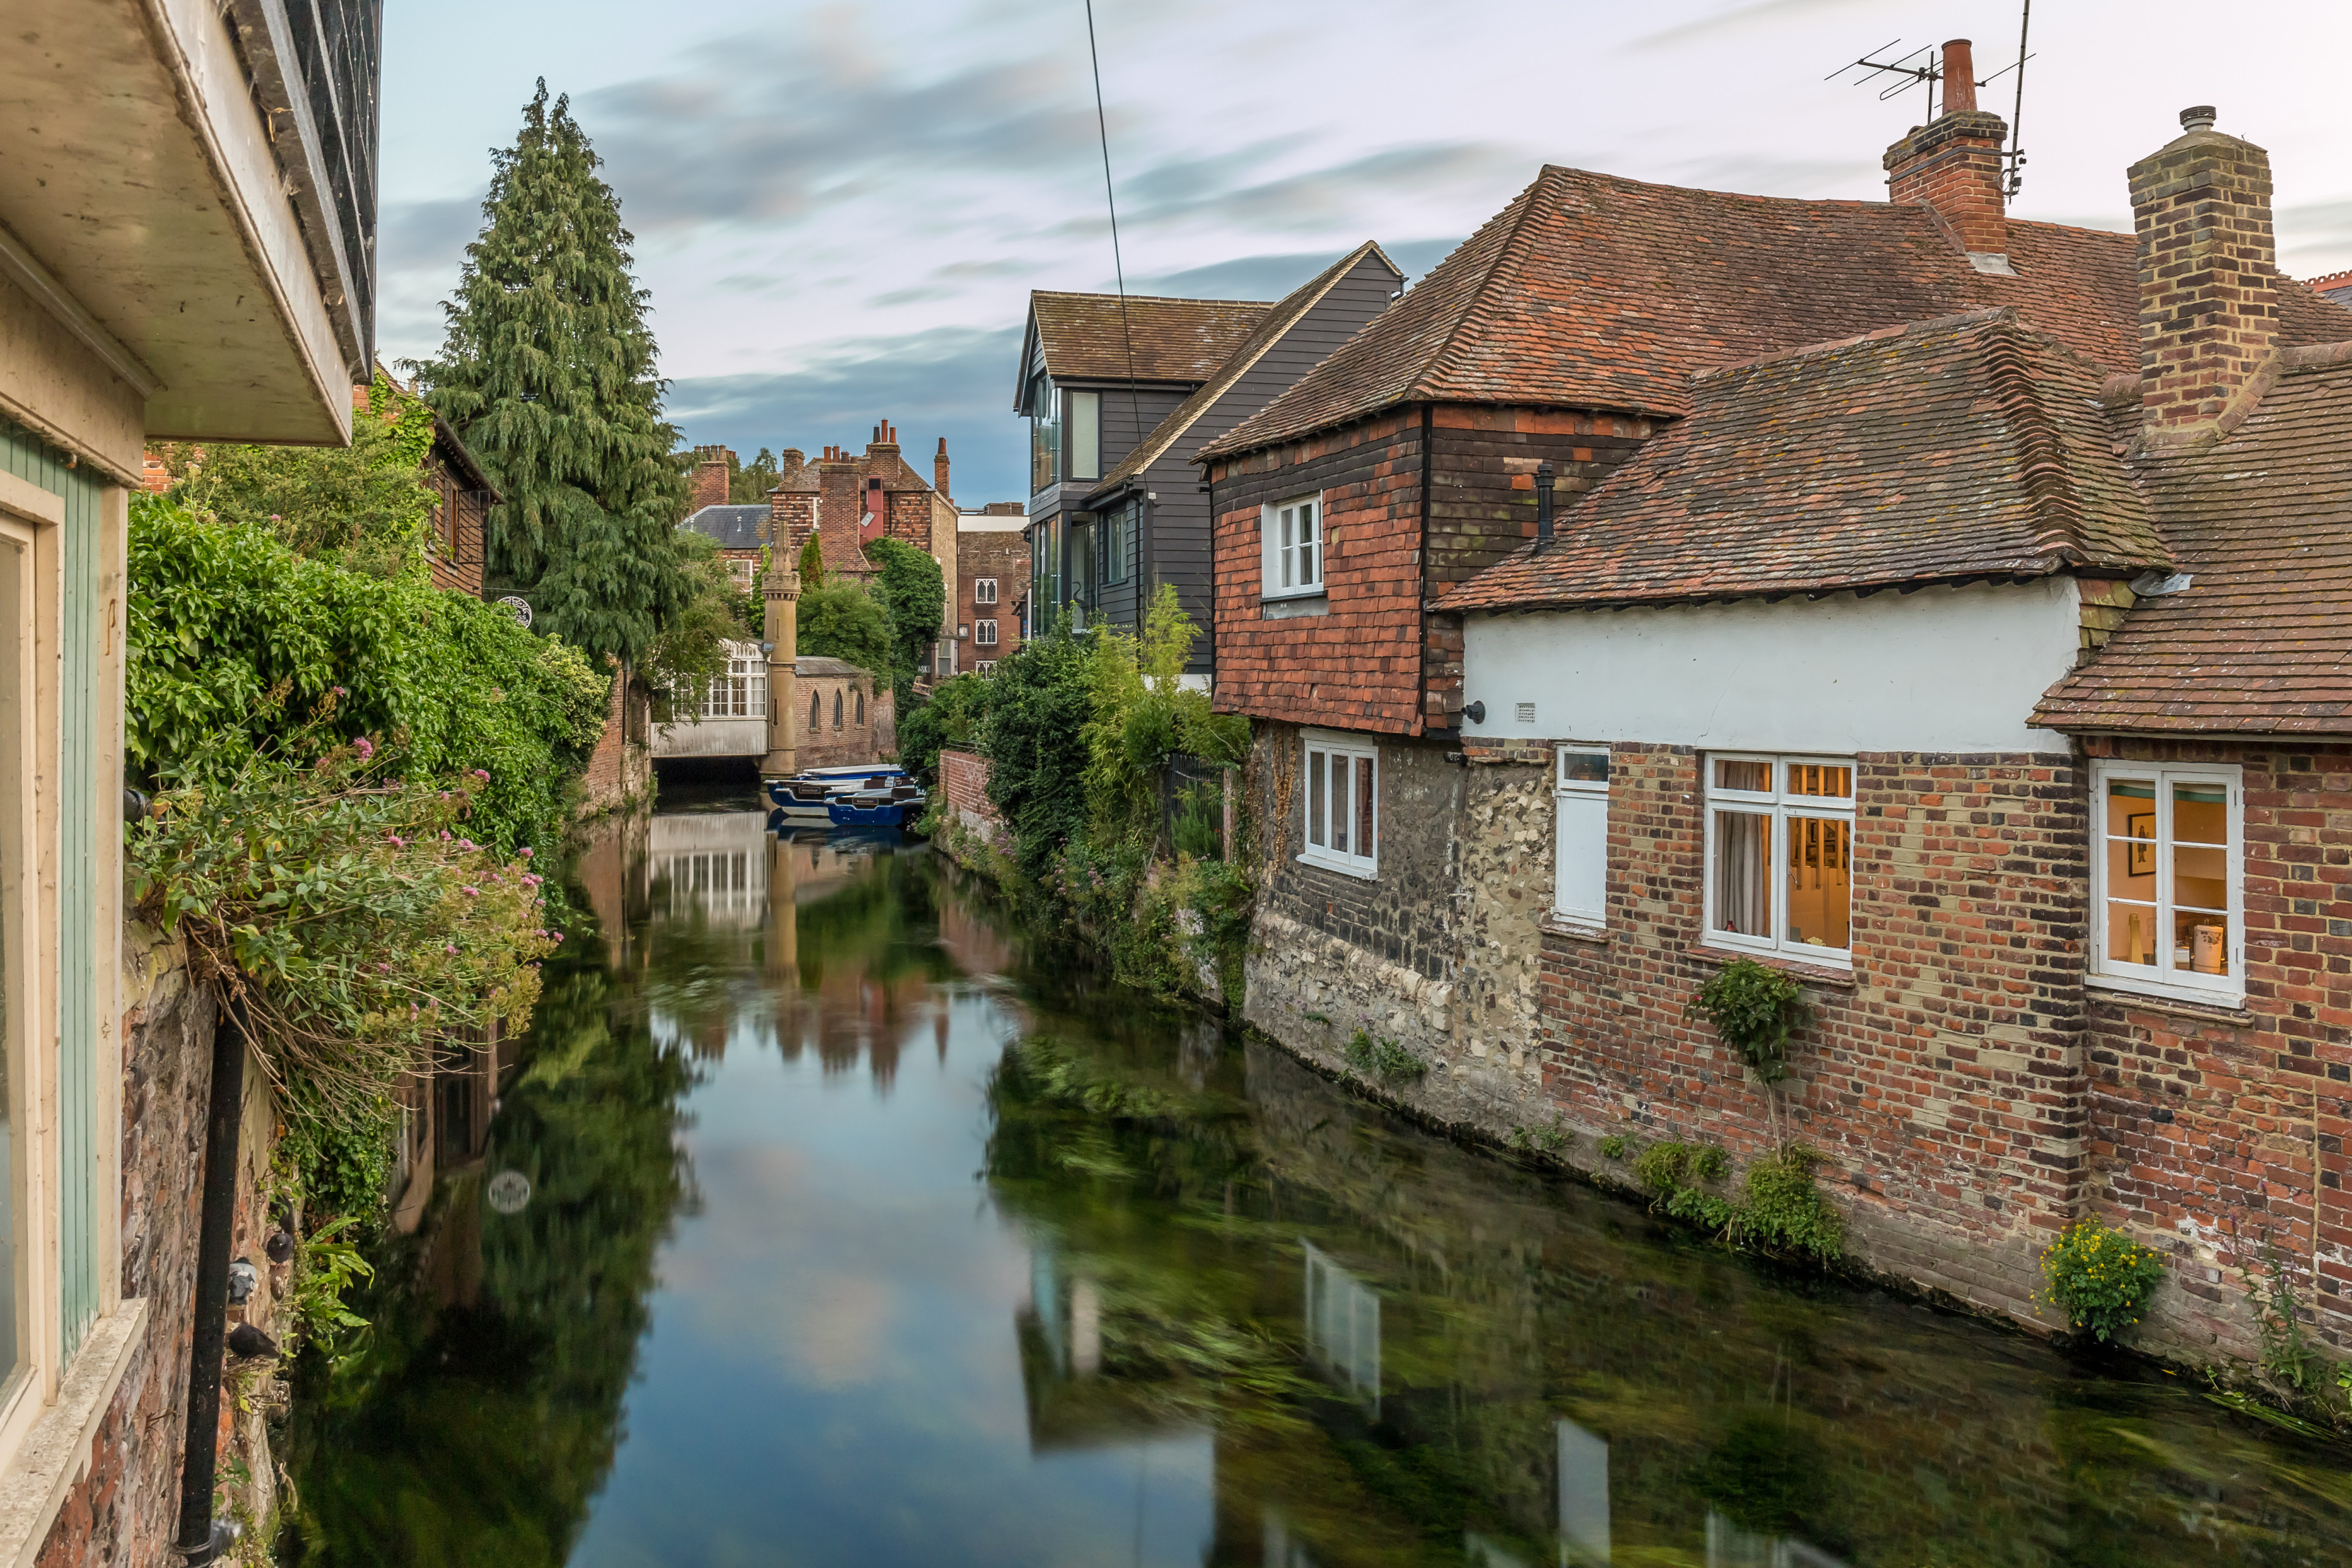 Rural Kent, UK. Moving into one’s own English village house completes the long relocation process from Hong Kong and is exciting, but also stressful. Photo: Shutterstock